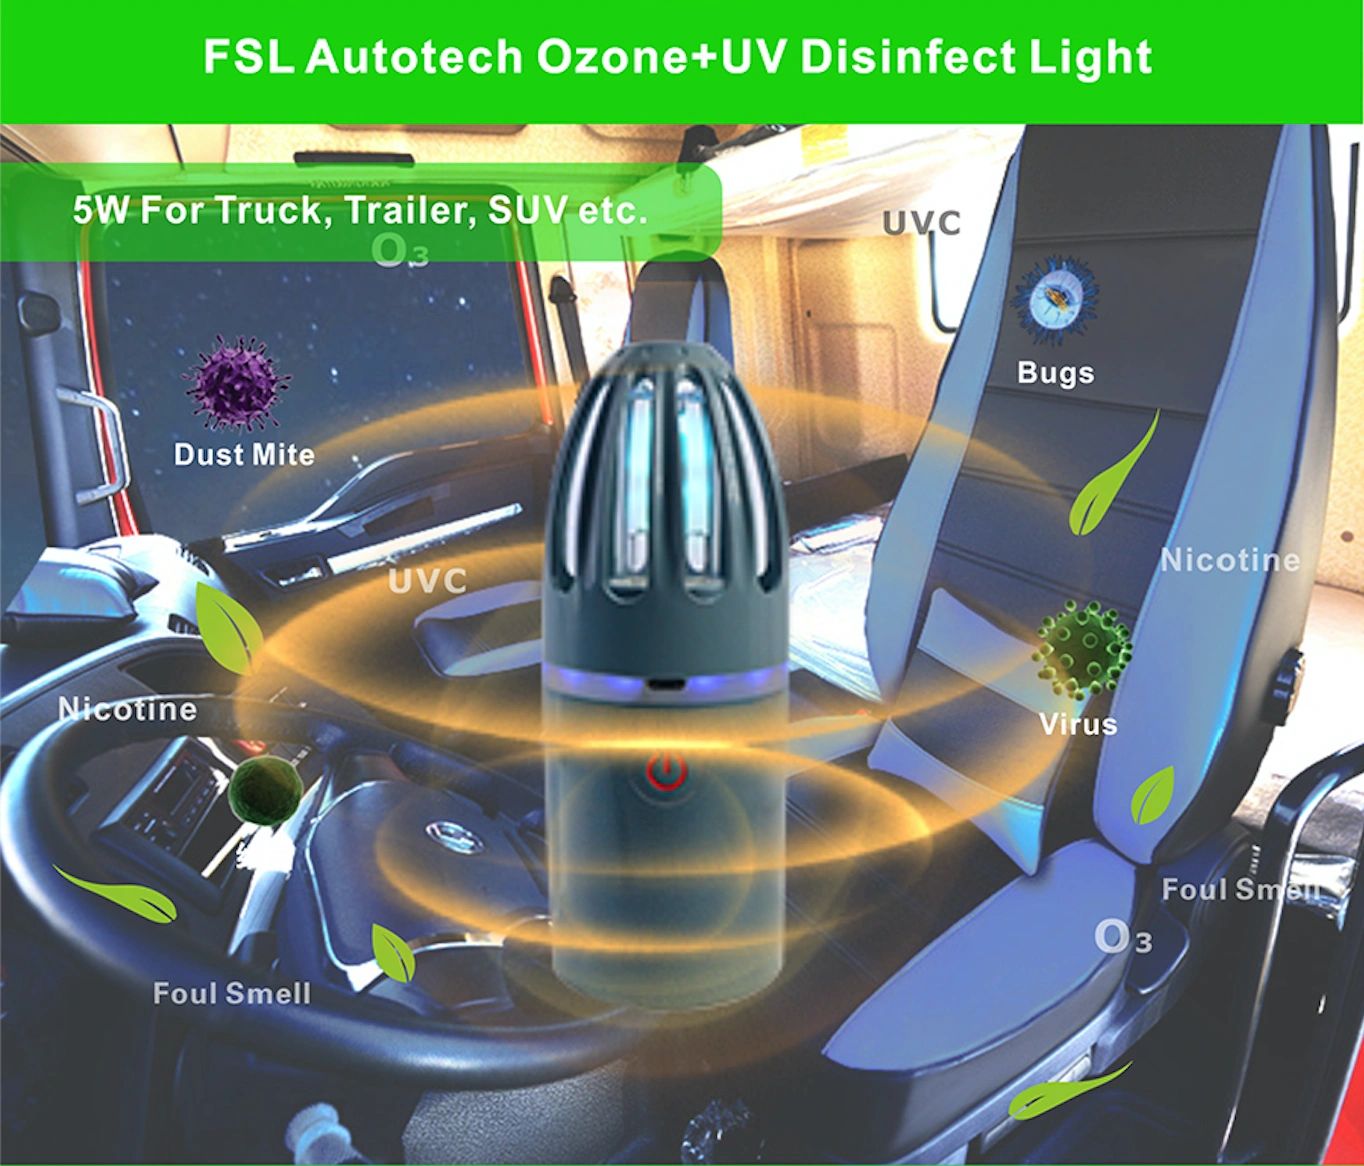 FSL Autotech UV Ozone Disinfect Light sanitize your truck or trailer